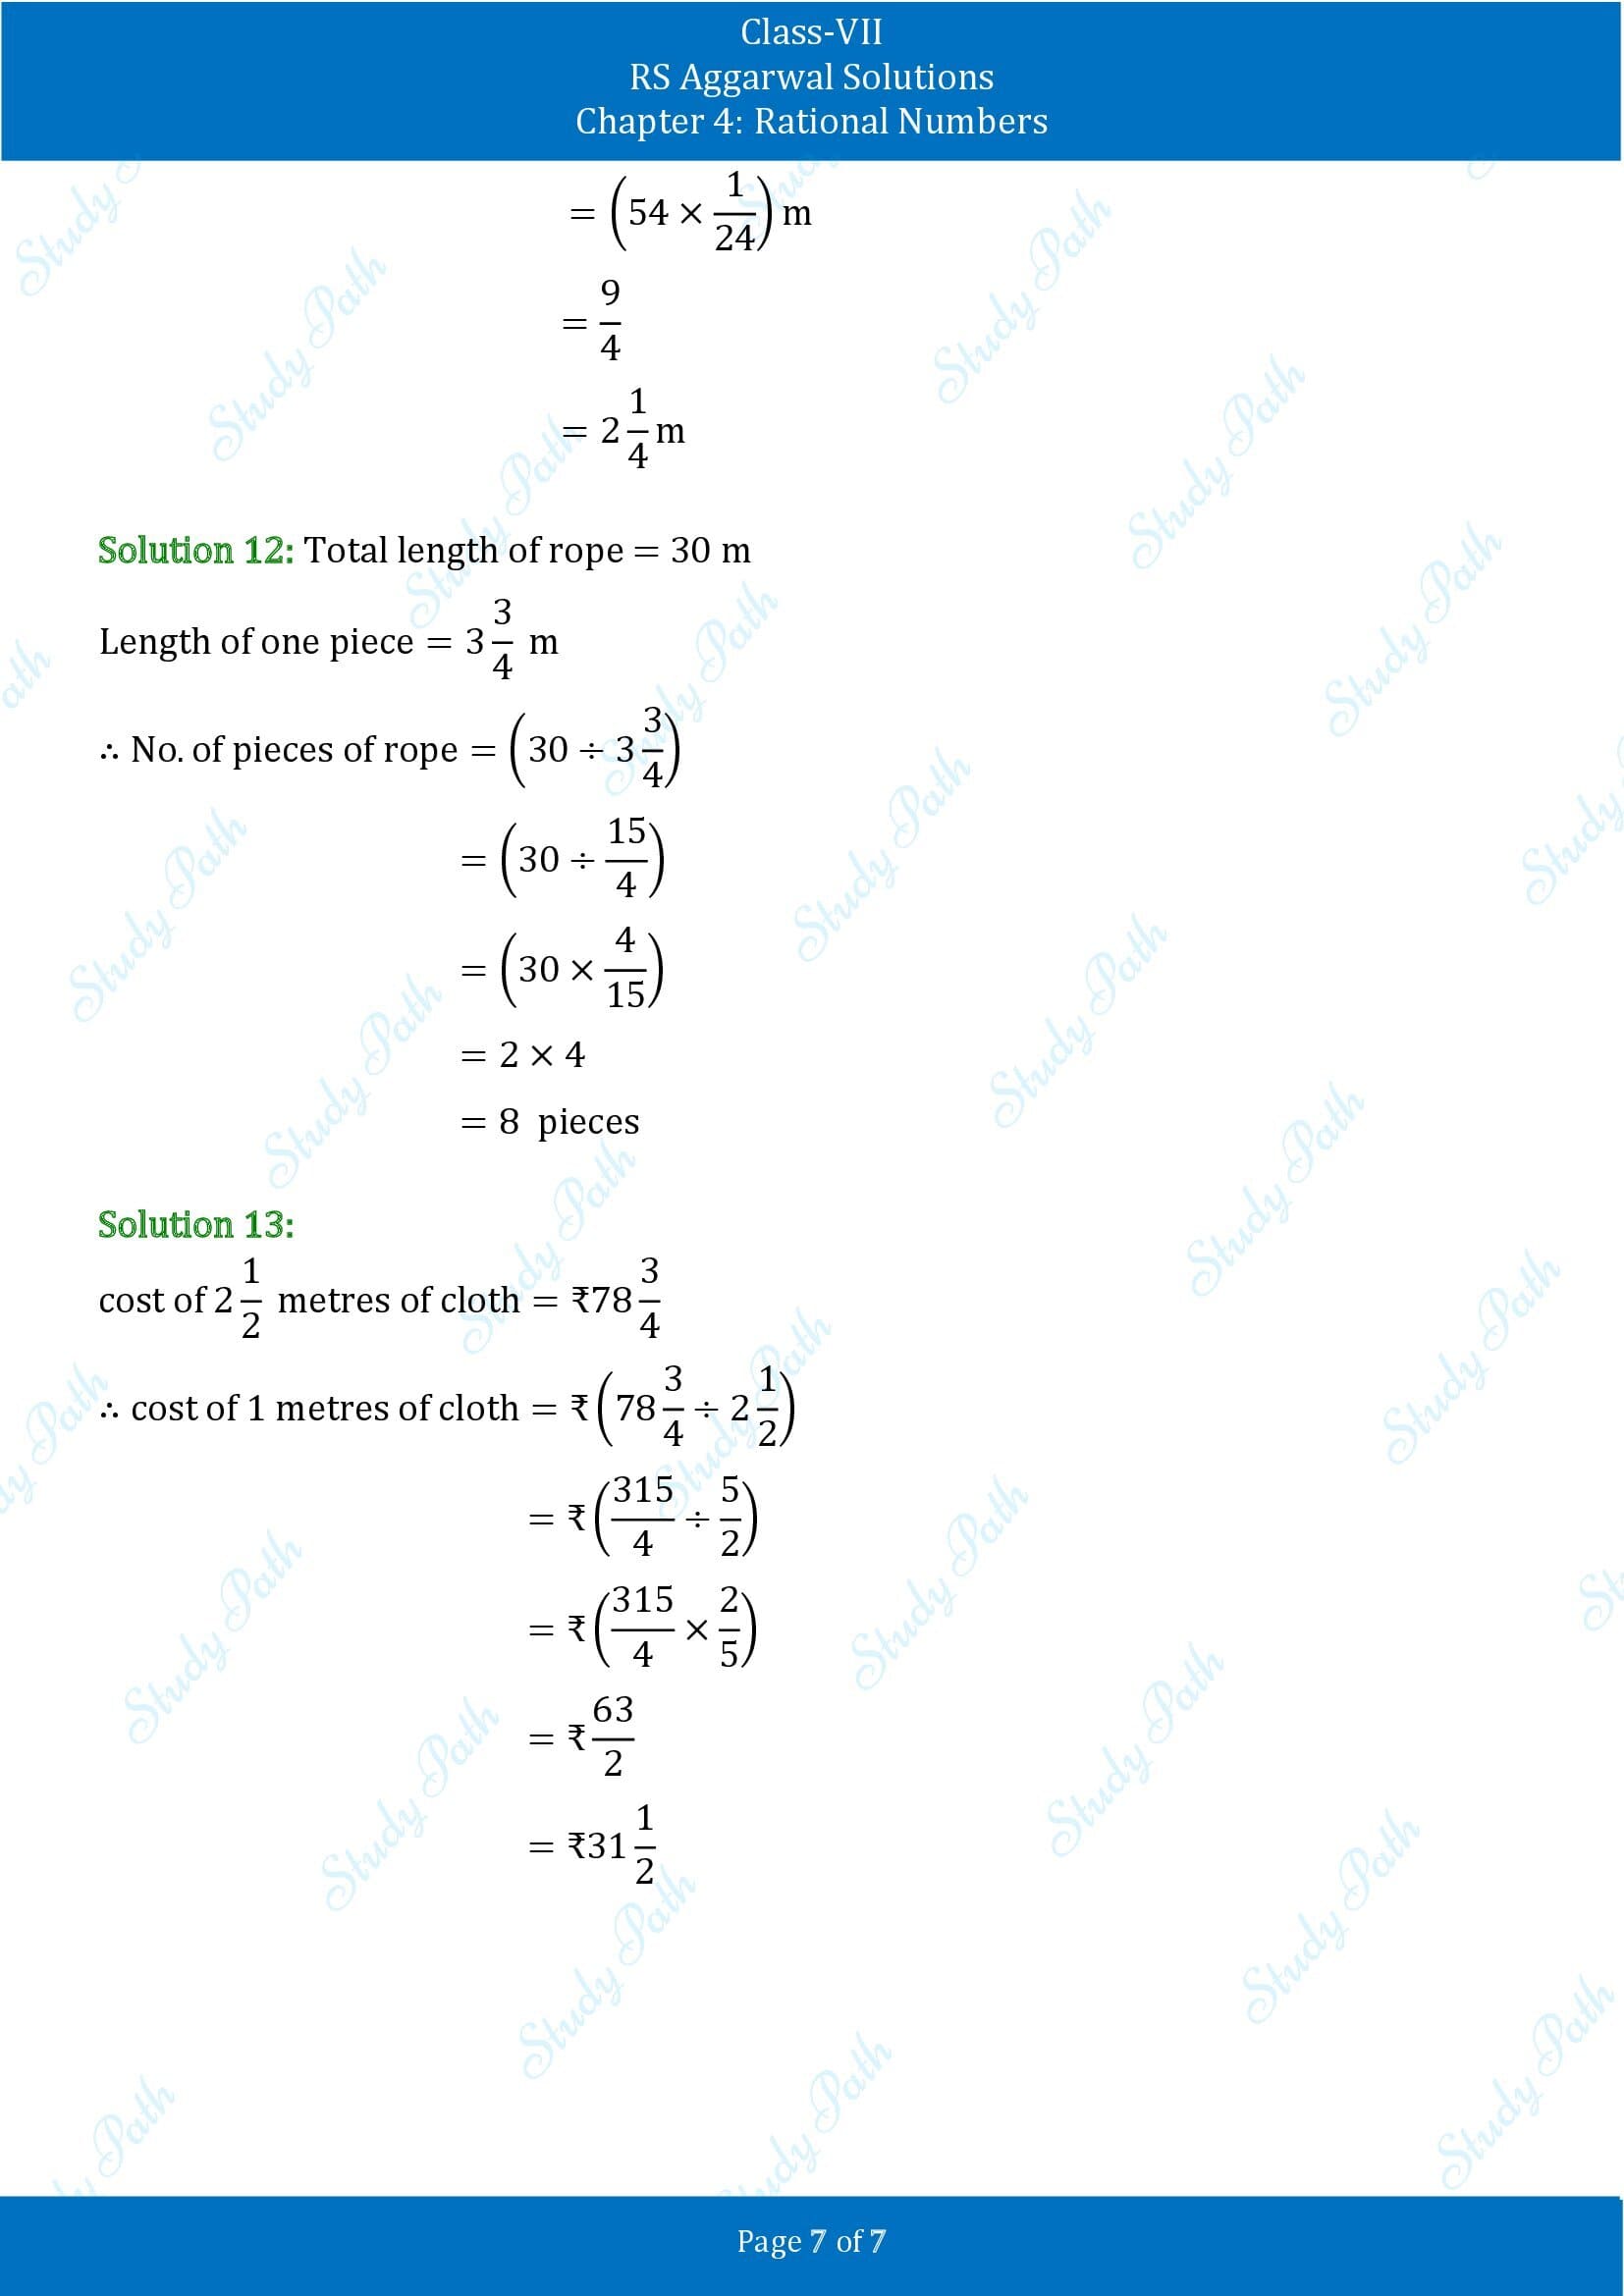 RS Aggarwal Solutions Class 7 Chapter 4 Rational Numbers Exercise 4F 00007